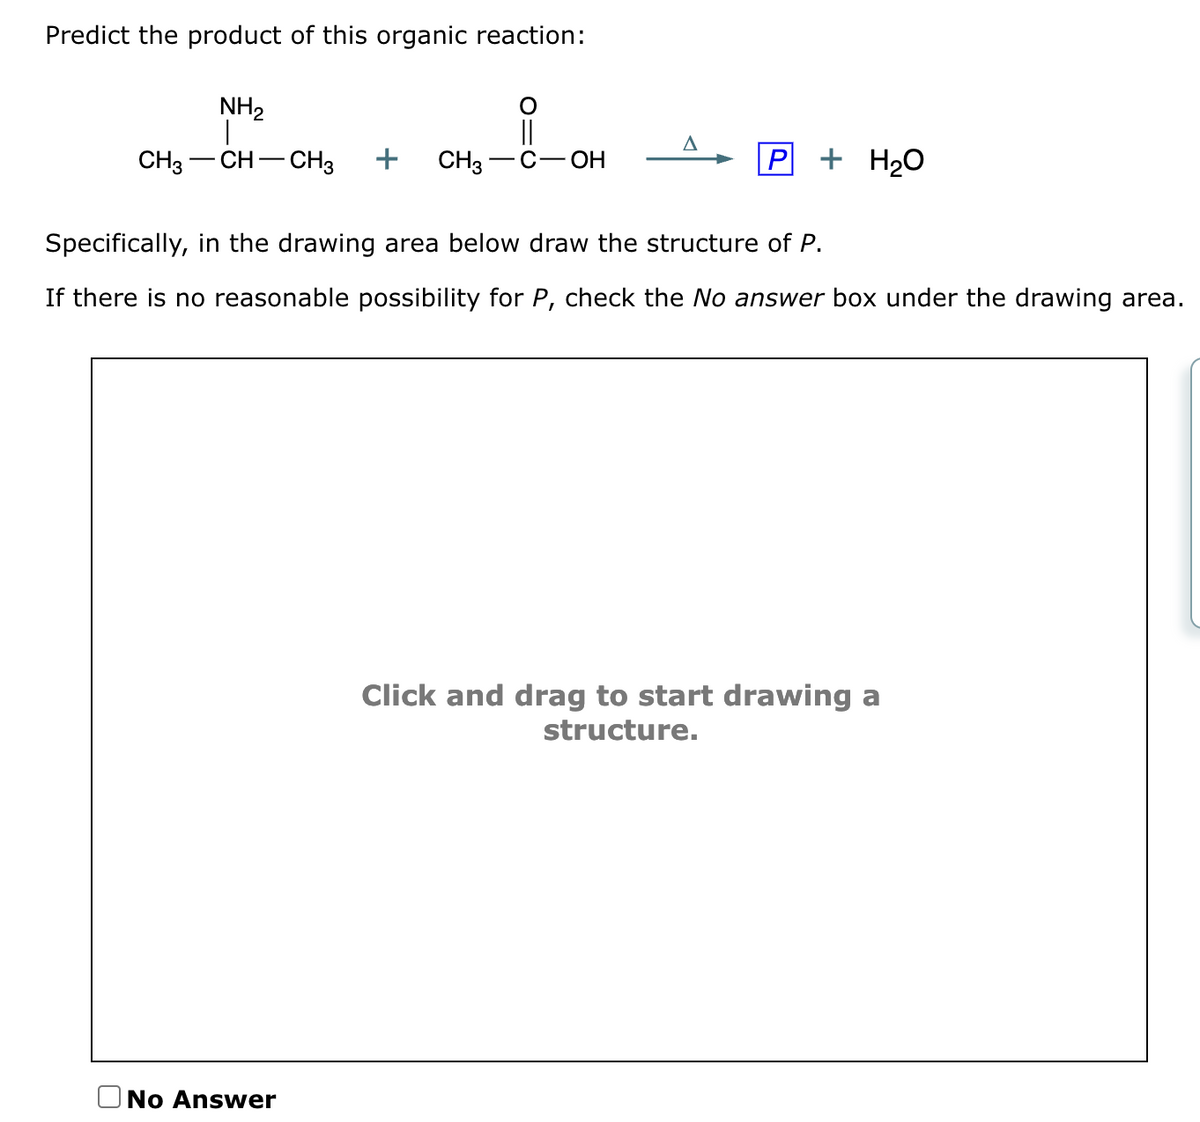 Predict the product of this organic reaction:
NH₂
||
CH3 CH CH3 + CH3 C-OH
A
No Answer
P + H₂O
Specifically, in the drawing area below draw the structure of P.
If there is no reasonable possibility for P, check the No answer box under the drawing area.
Click and drag to start drawing a
structure.